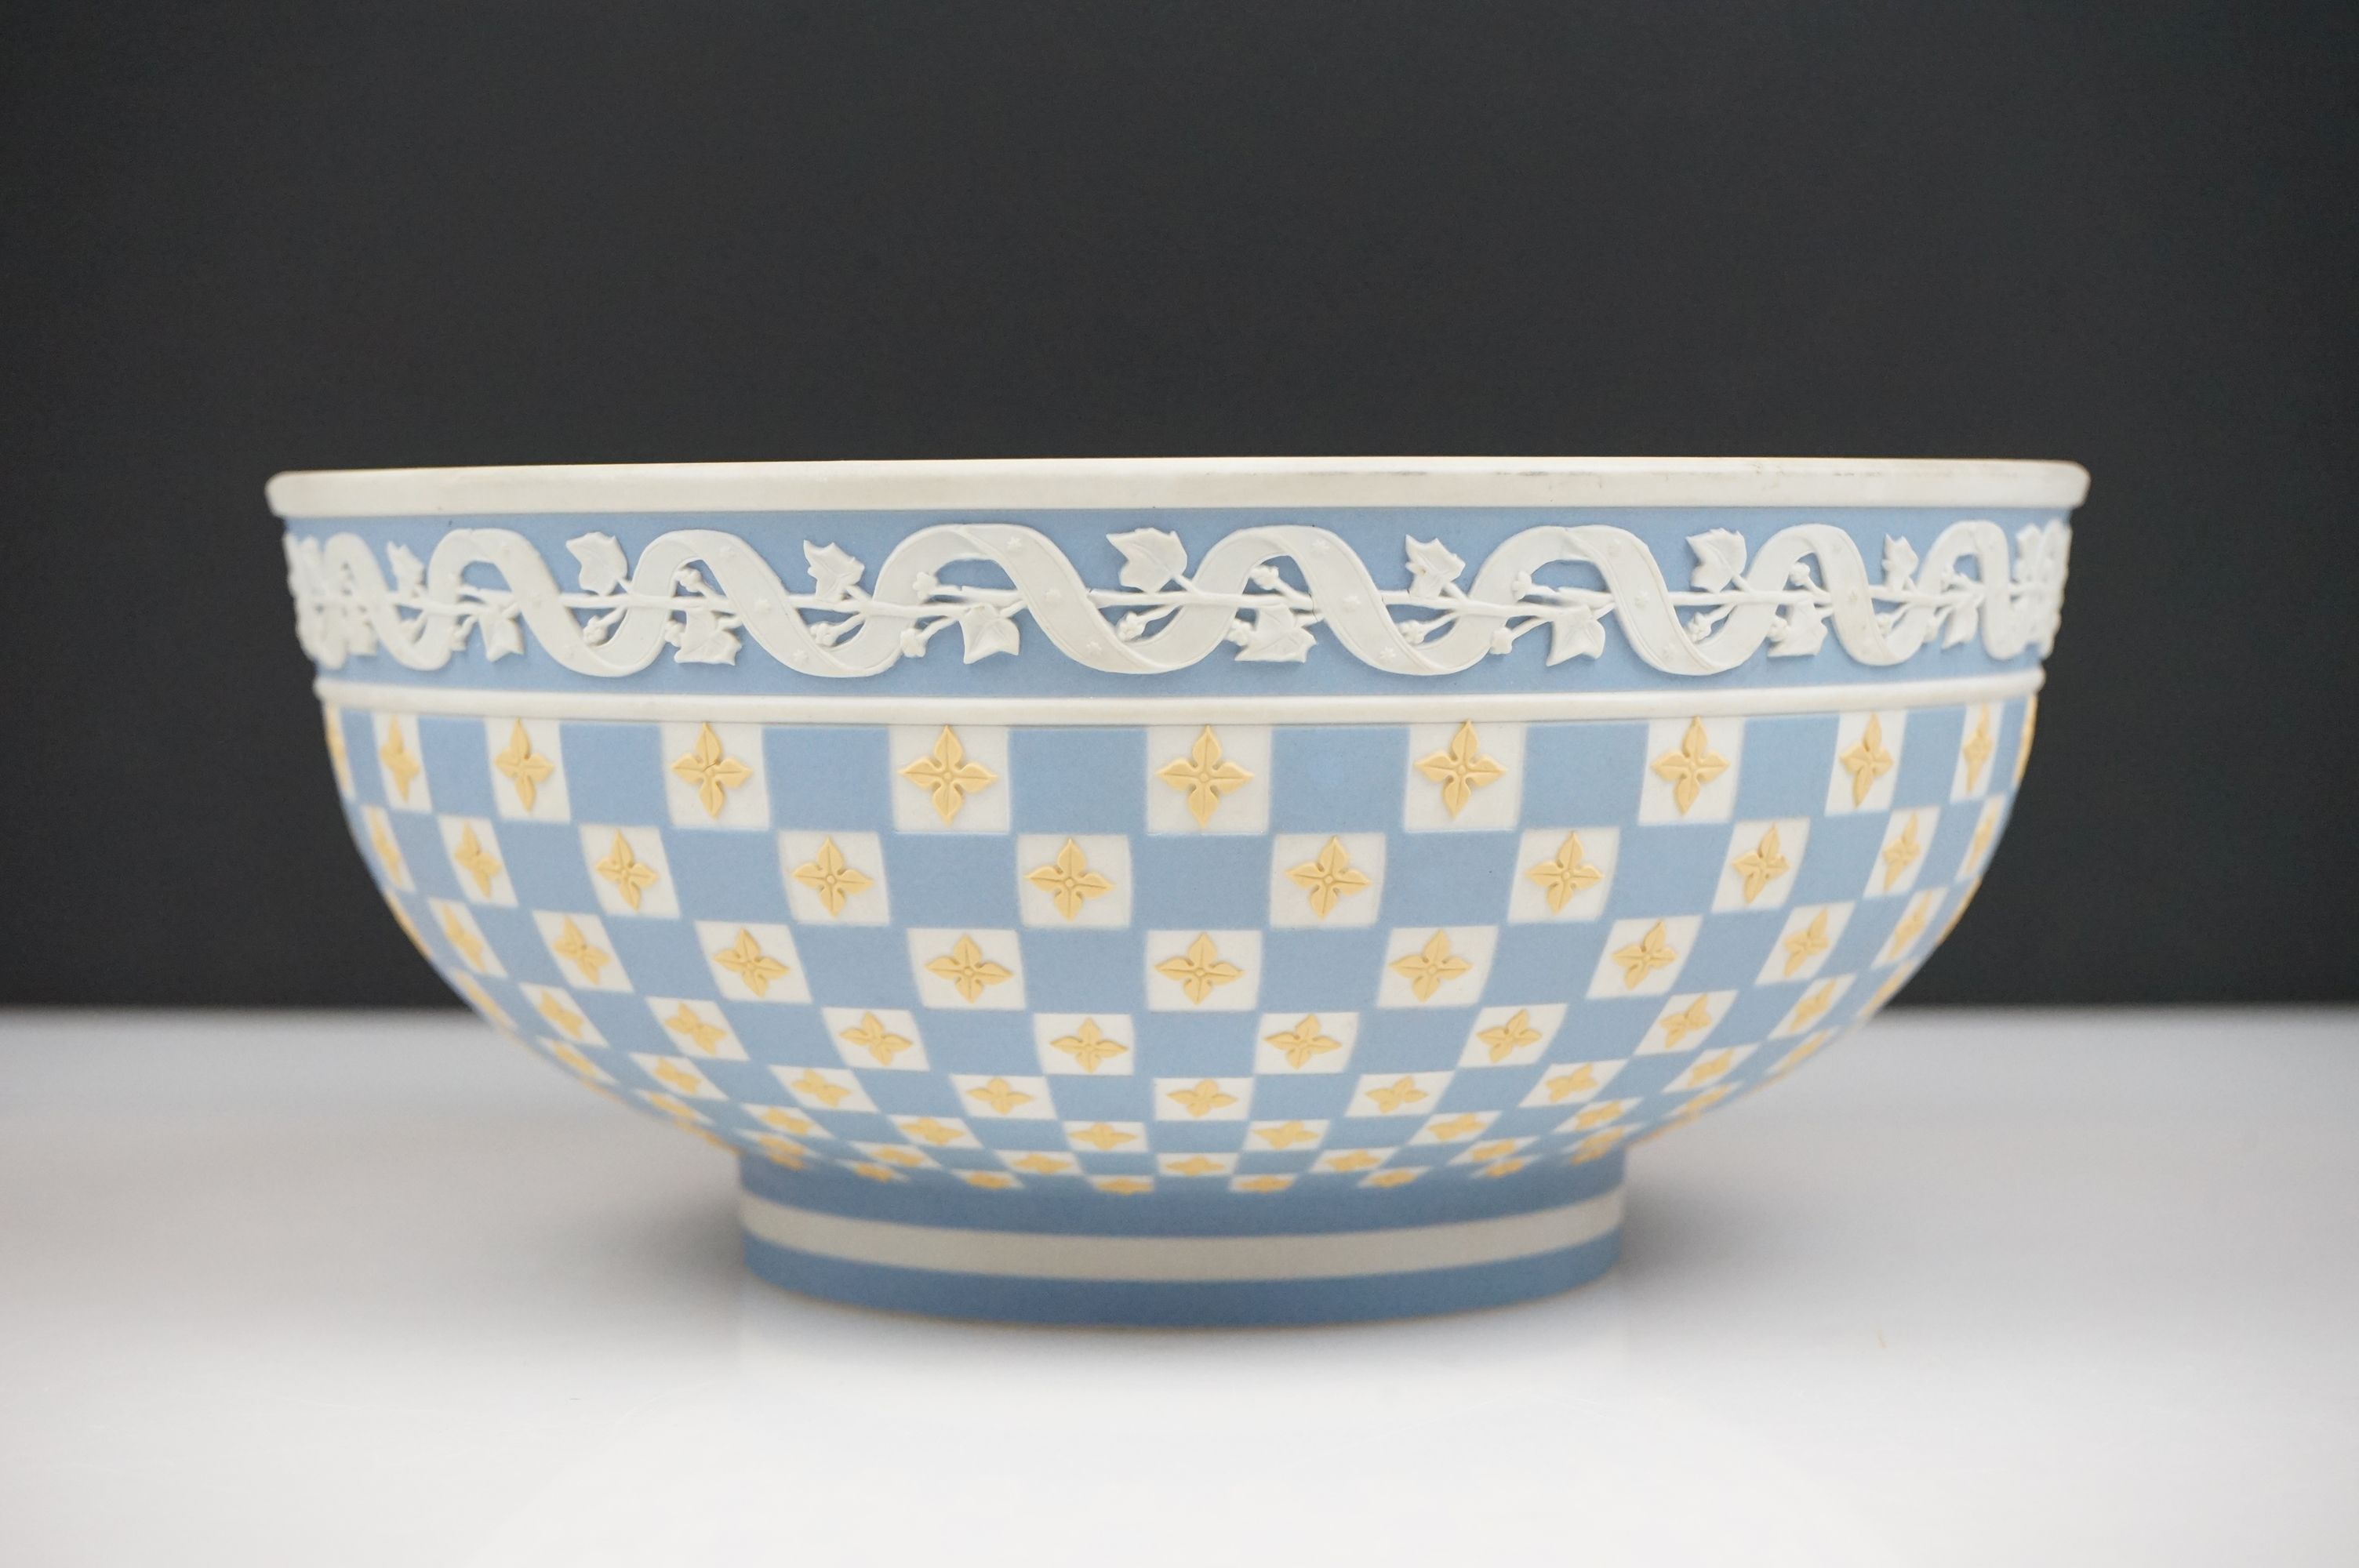 Wedgwood Museum series limited edition Bowl, after an original 18th century design with a diced